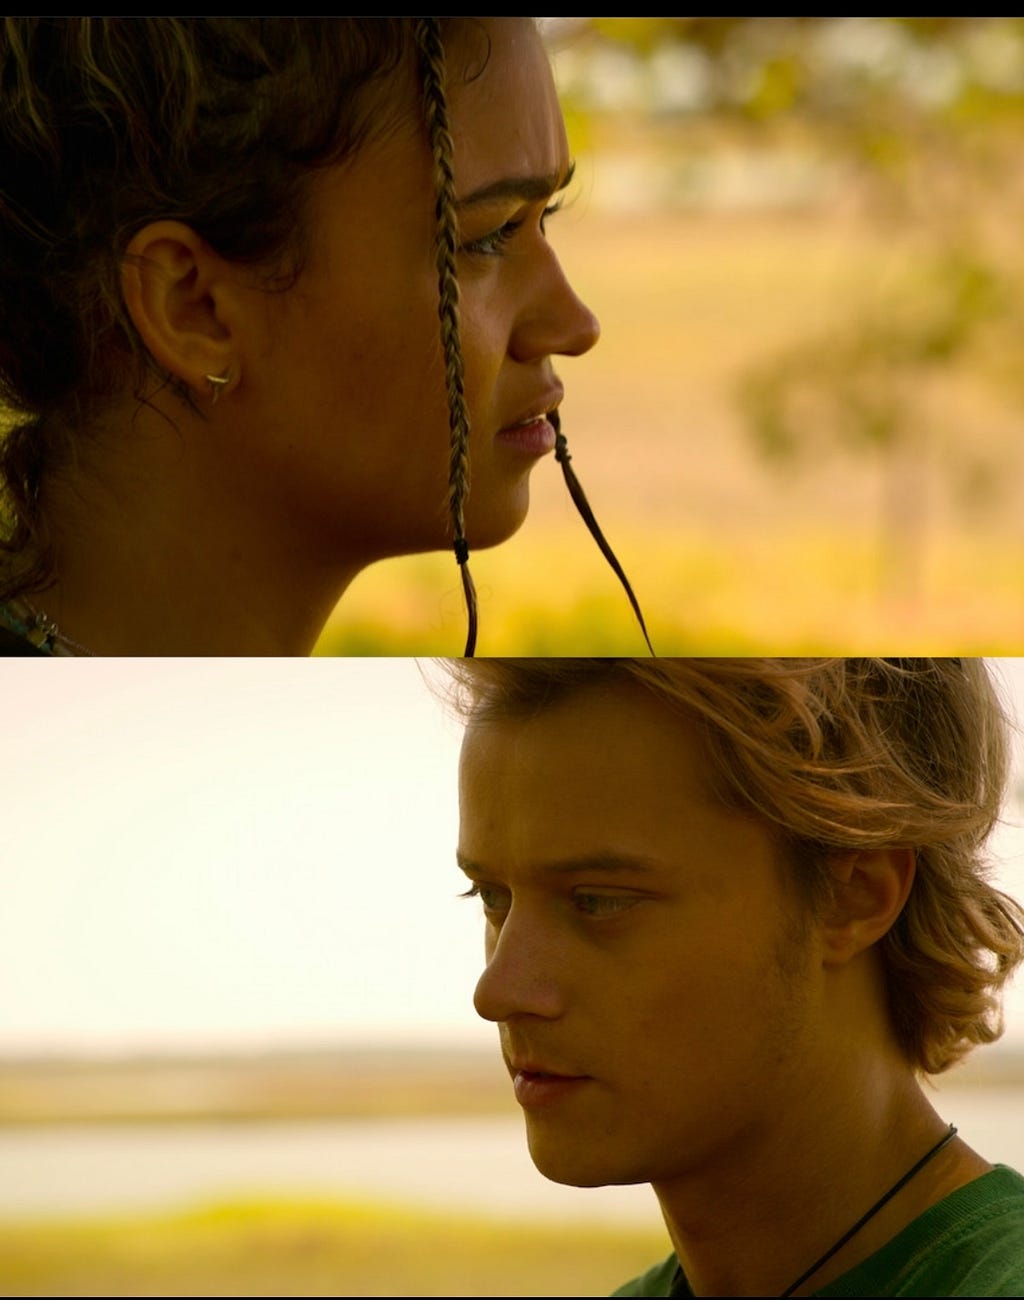 Image of two shots of Kie and JJ gazing at each other.